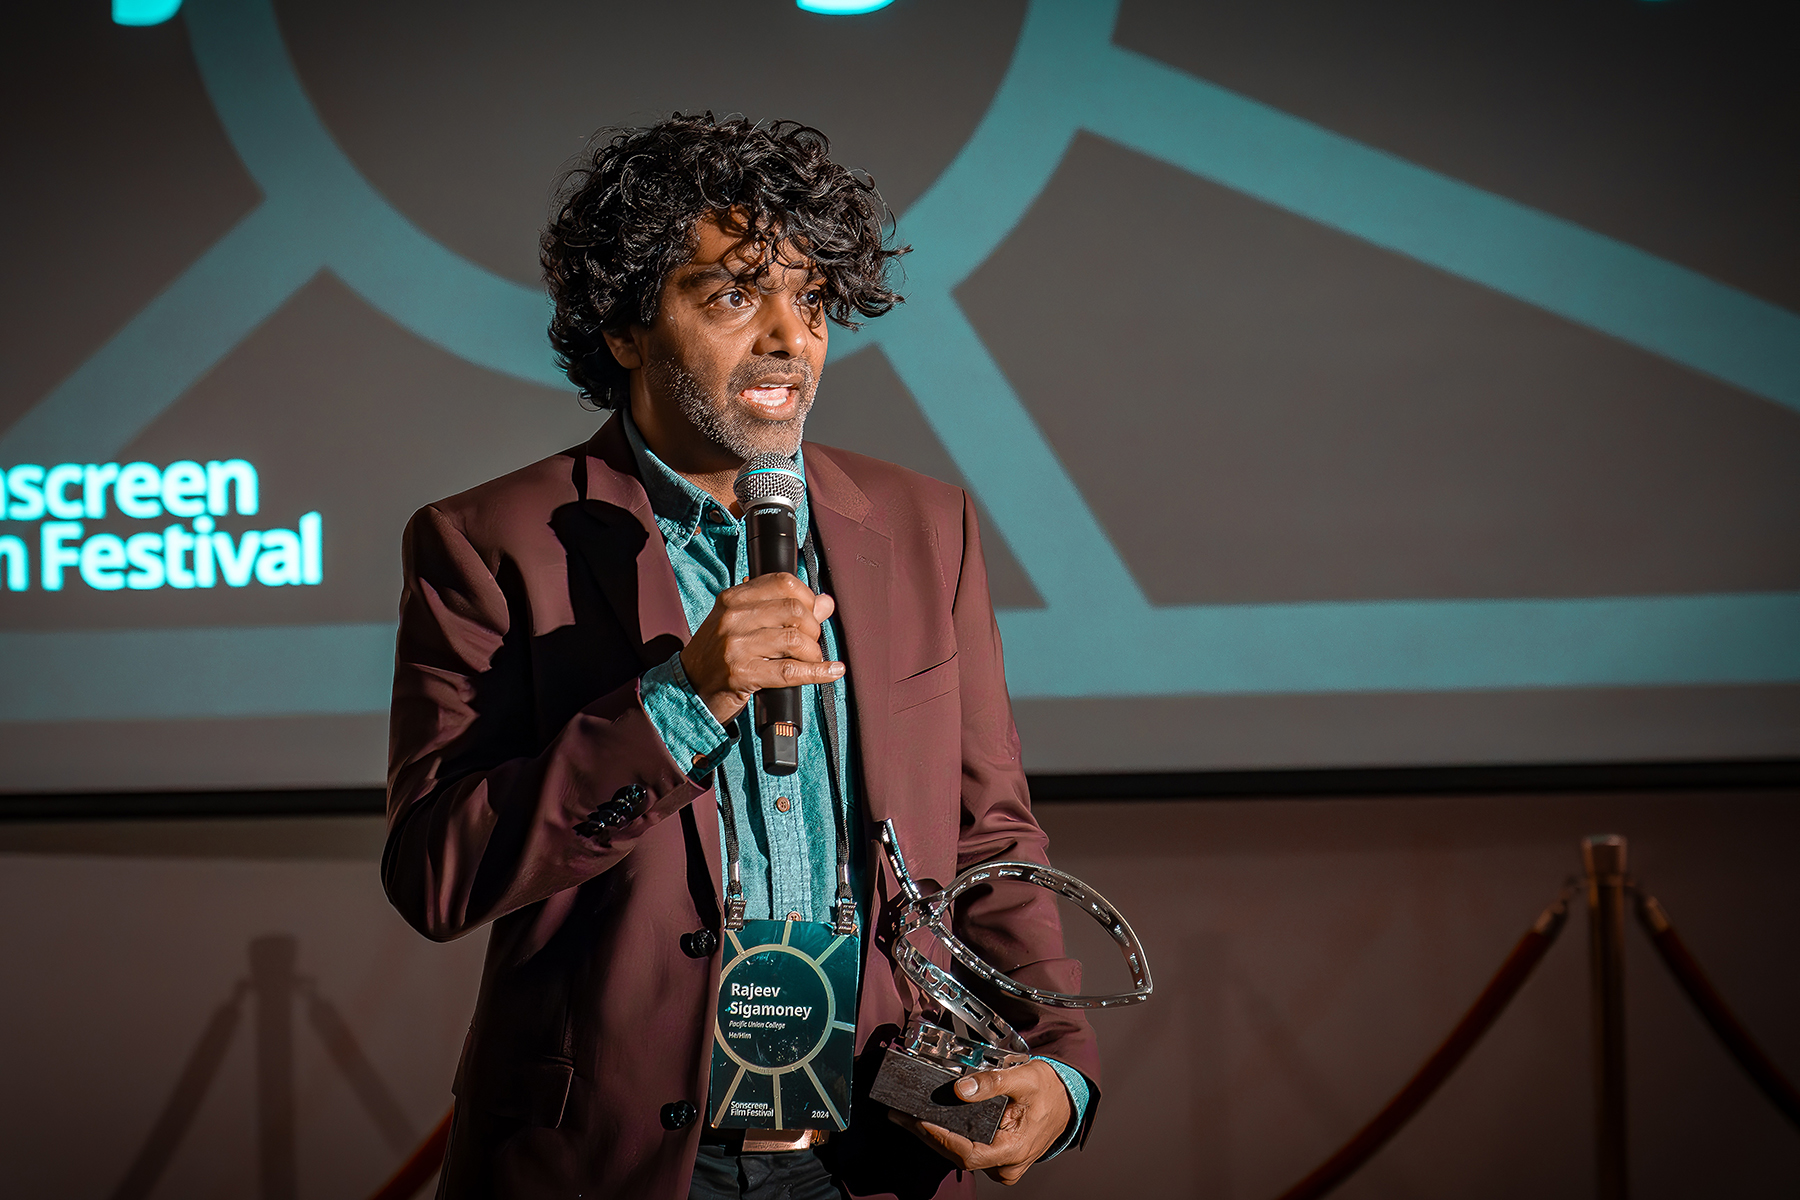 A brown man with curly hair holds an award that looks like a film reel and speaks into a microphone, emotional.